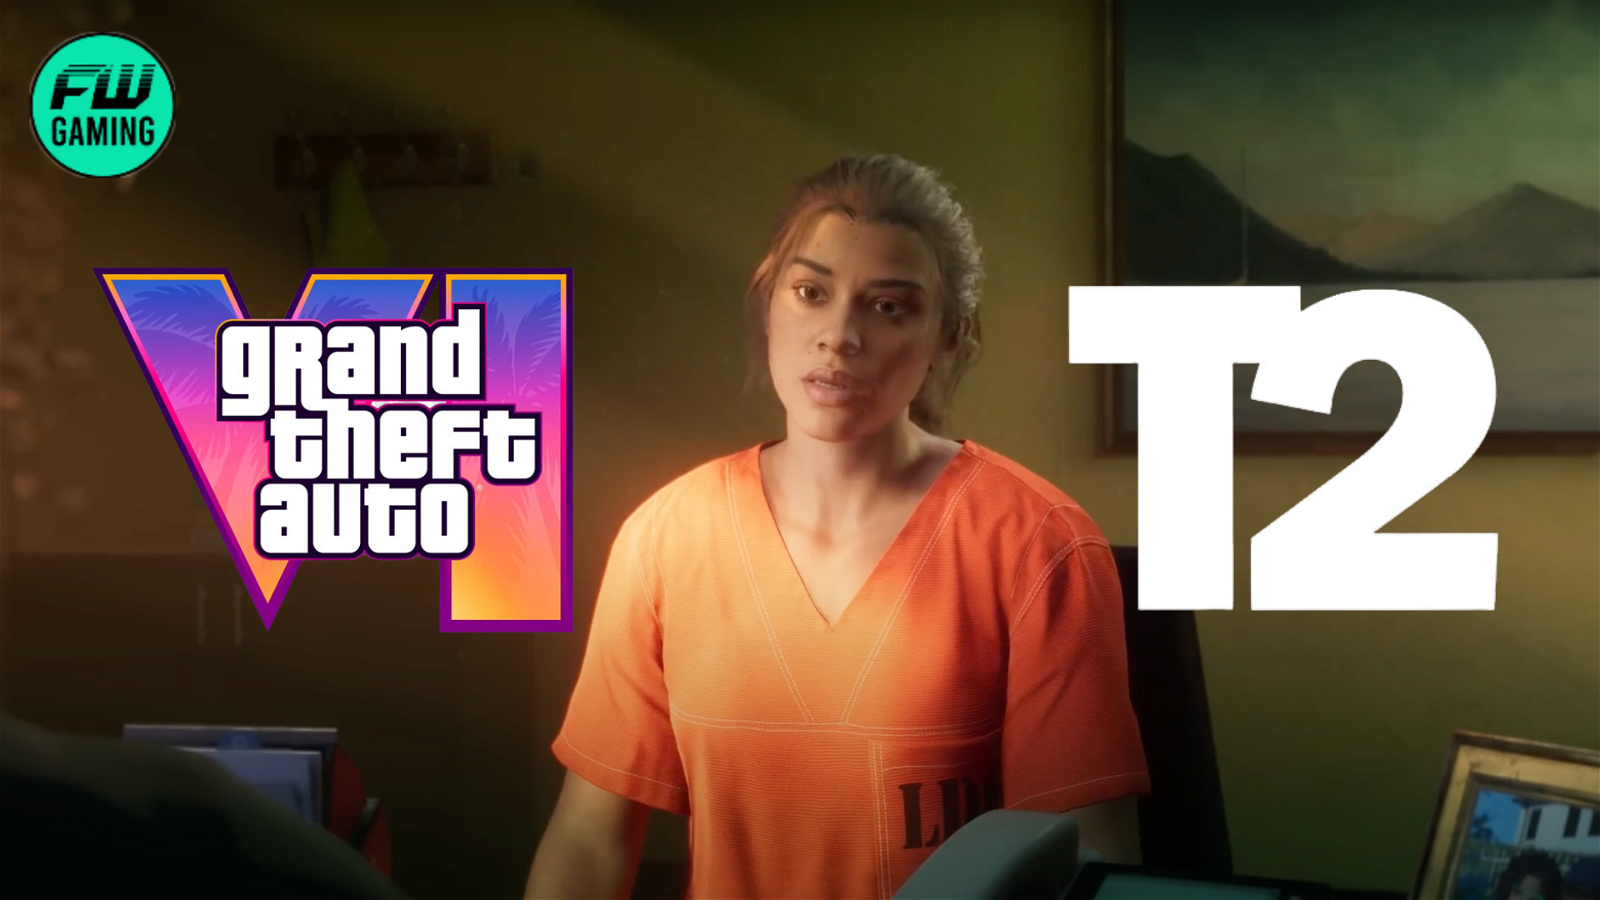 Take-Two CEO Couldn't Care Less About GTA 6 Trailer Leaking Before Time as It Still "Broke the Internet"